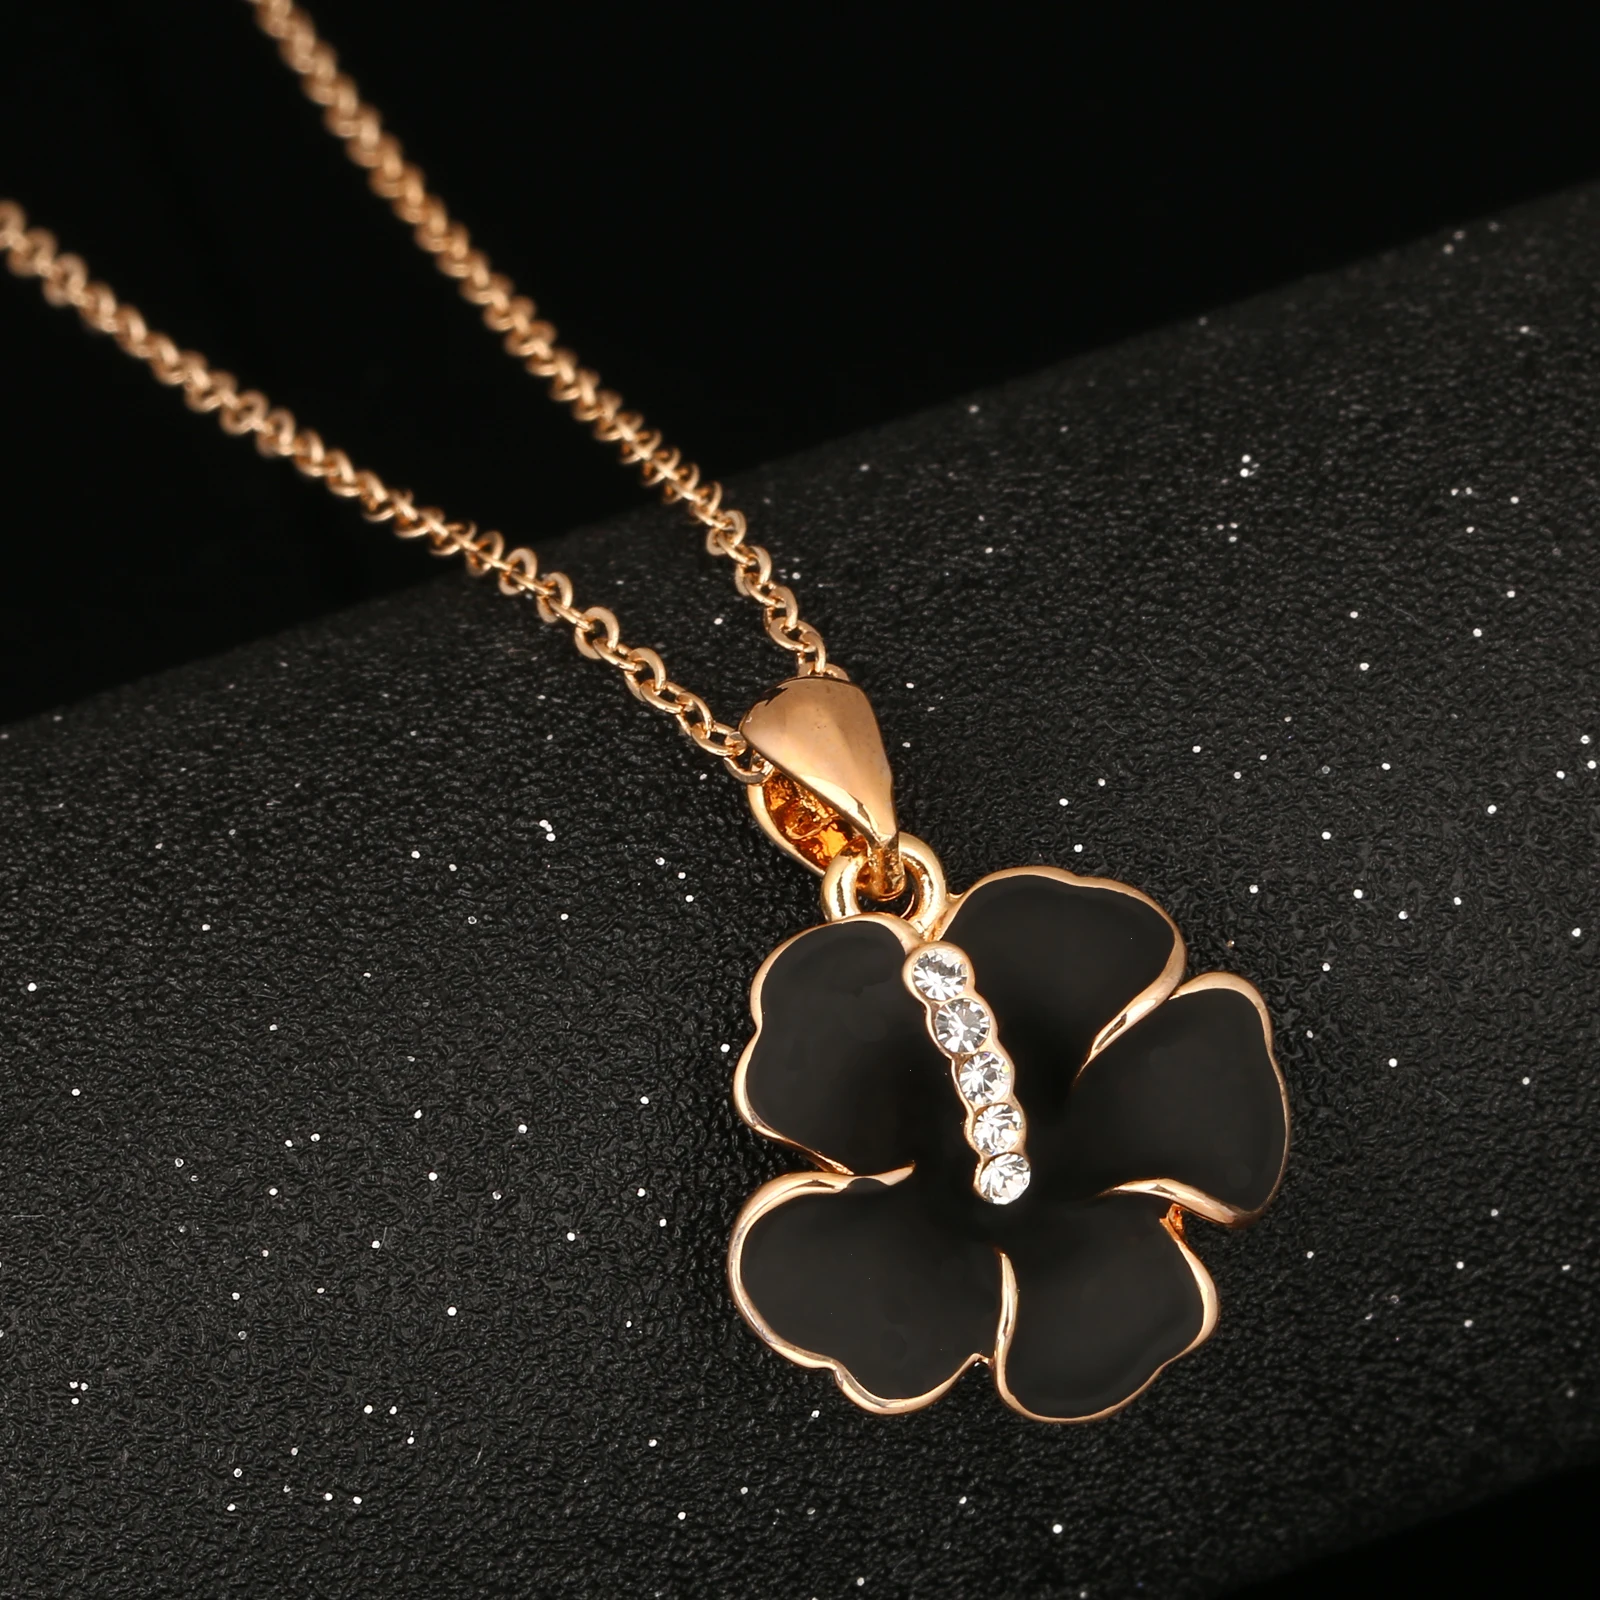 

Top Quality ZYN280 Black Rose Rose Gold Color Fashion Pendant Jewelry Made with Austria Crystal Elements